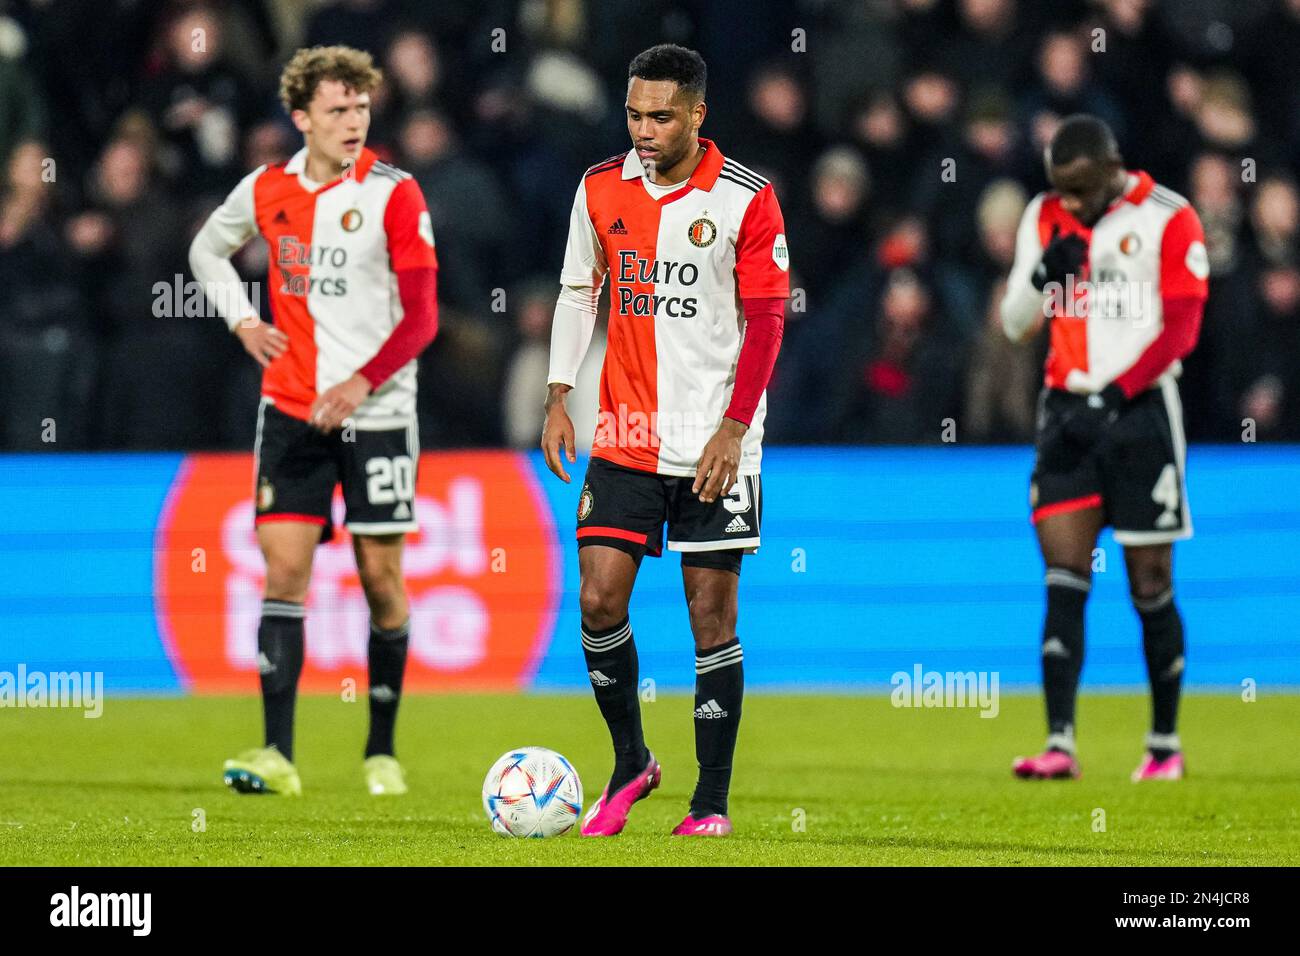 Rotterdam - Danilo Pereira da Silva of Feyenoord reacts to the 0-2 during the match between Feyenoord v NEC Nijmegen at Stadion Feijenoord De Kuip on 8 February 2023 in Rotterdam, Netherlands. (Box to Box Pictures/Yannick Verhoeven) Stock Photo